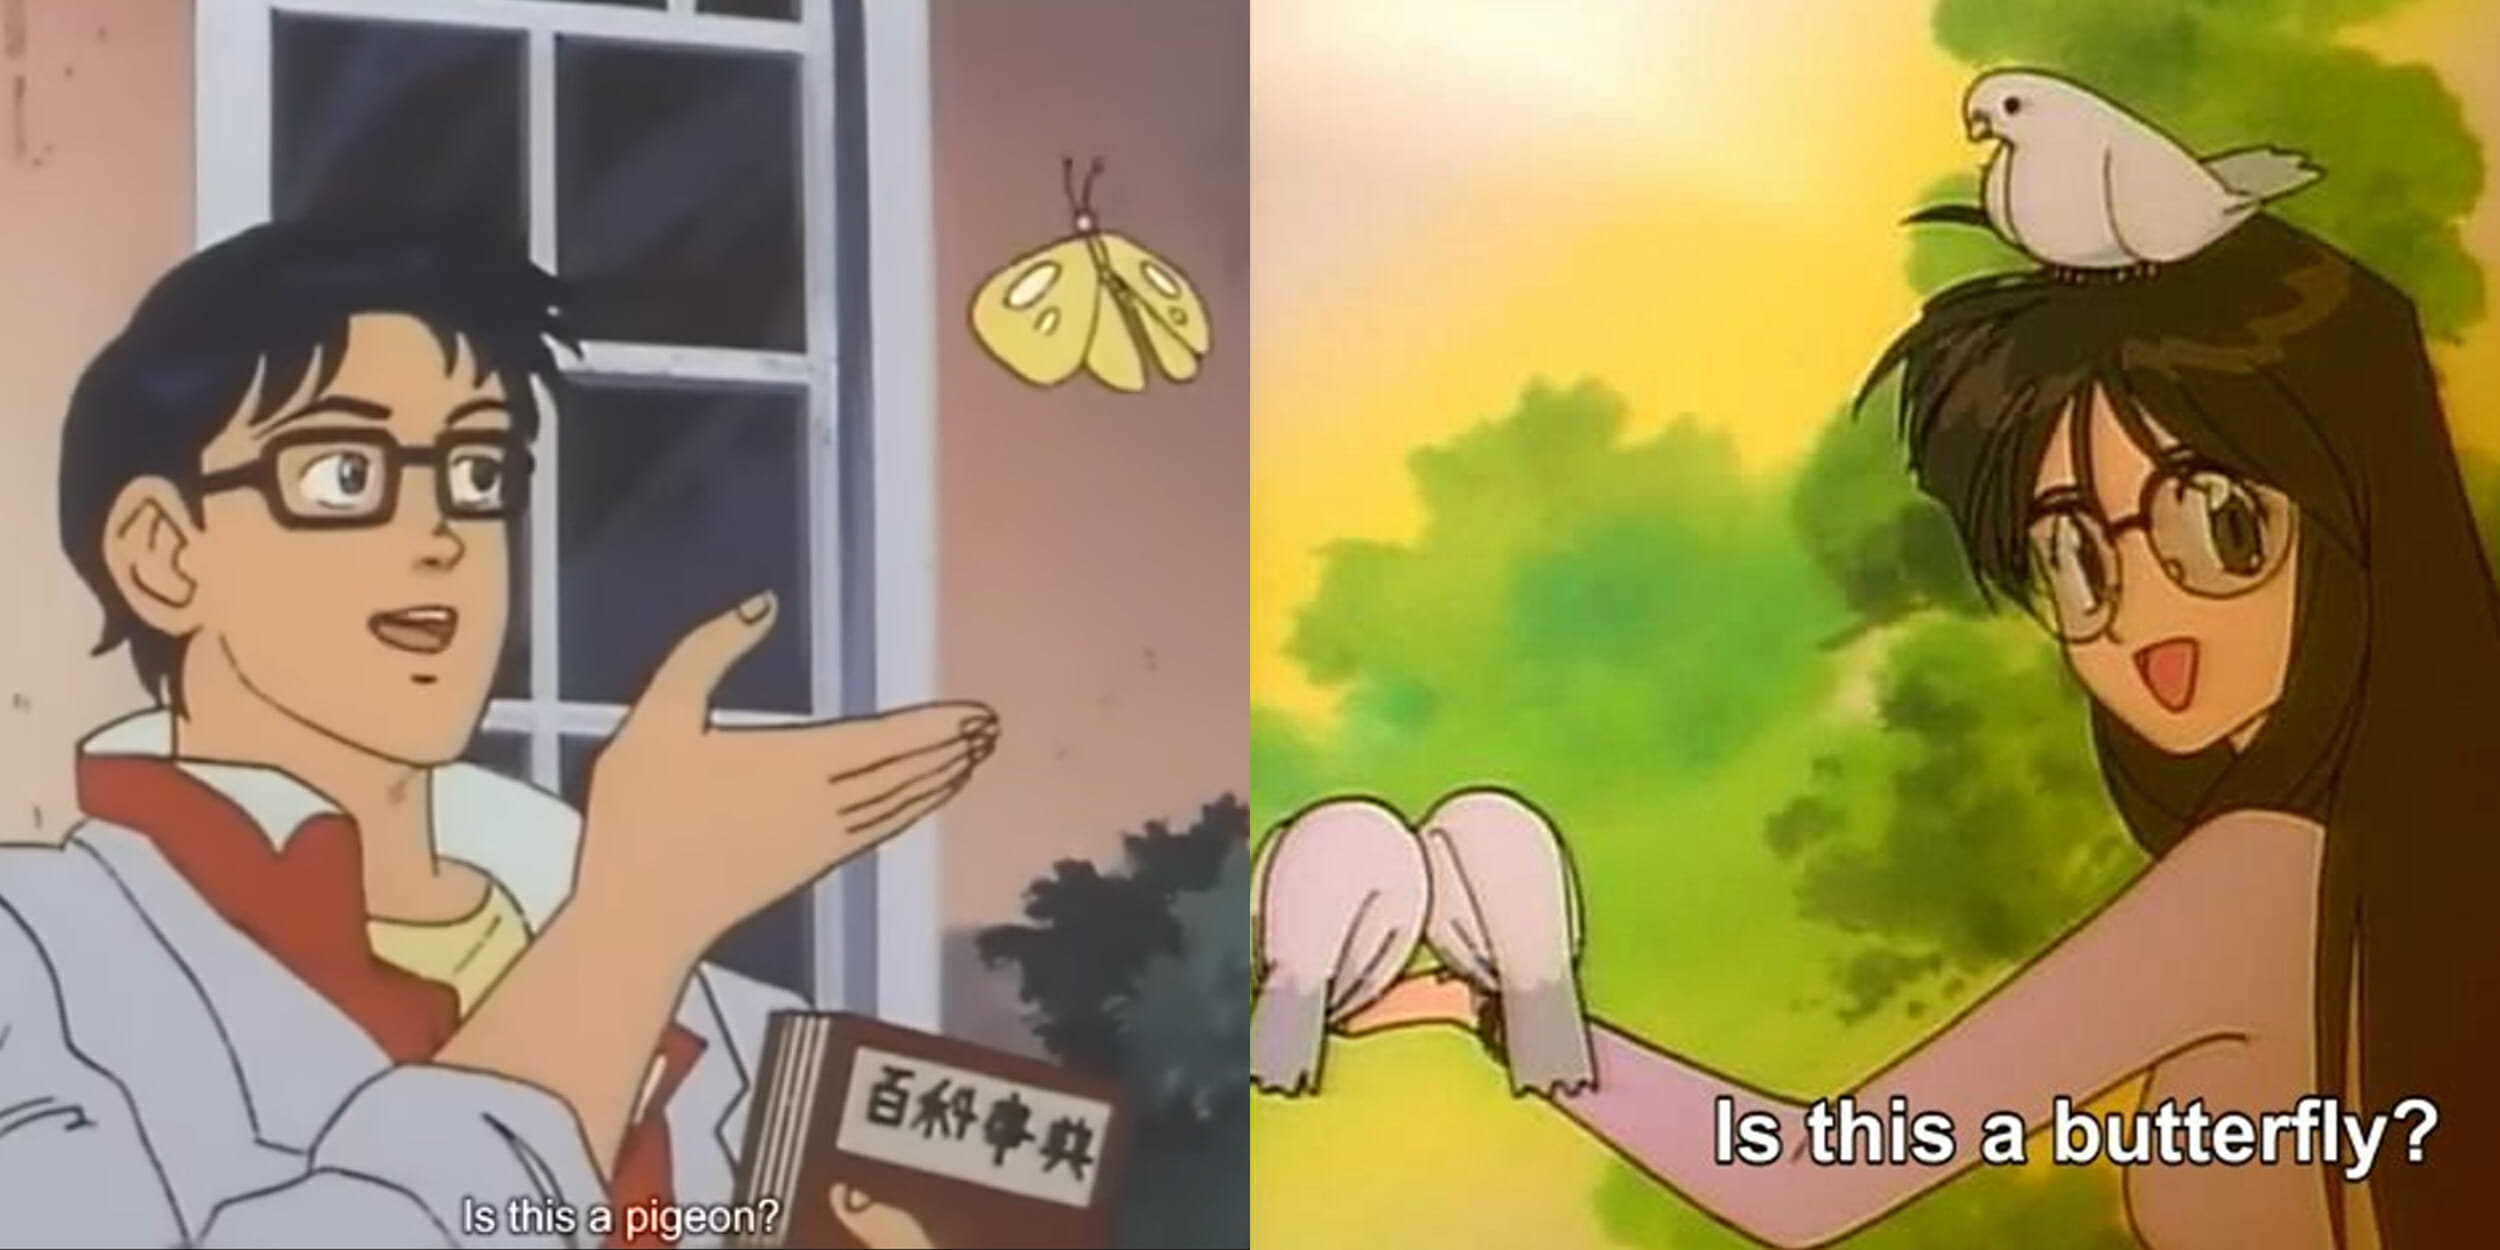 Create comics meme what kind of bird is this this pigeon meme anime meme  with butterfly anime  Comics  Memearsenalcom